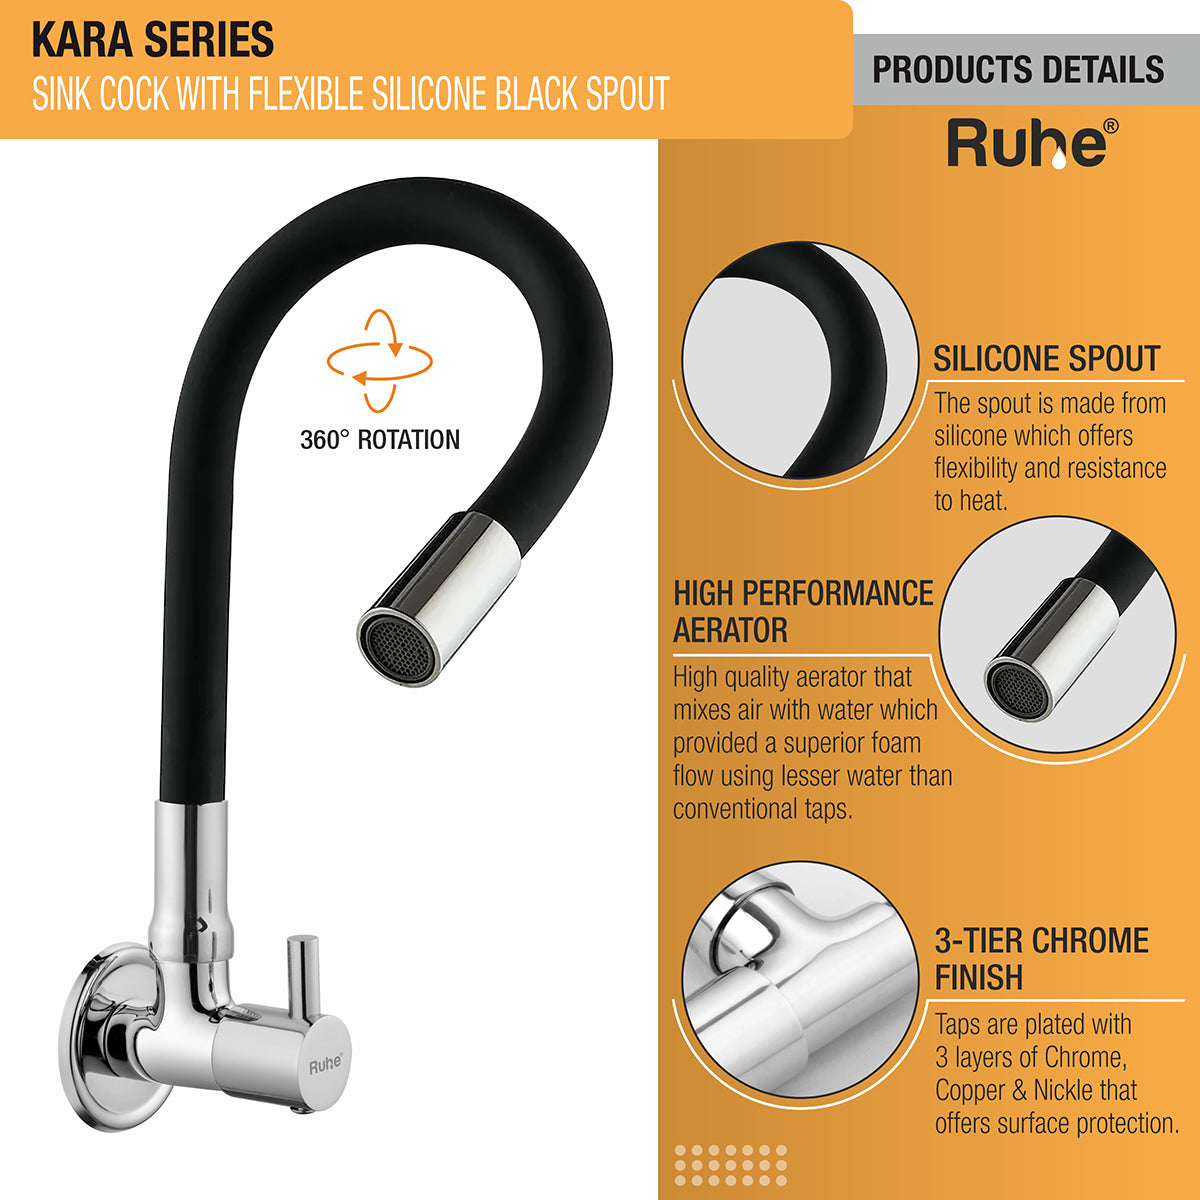 Kara Brass Sink Tap with Flexible Silicone Black Spout product details with silicone spout, high performance aerator, and 3 layer chrome plated